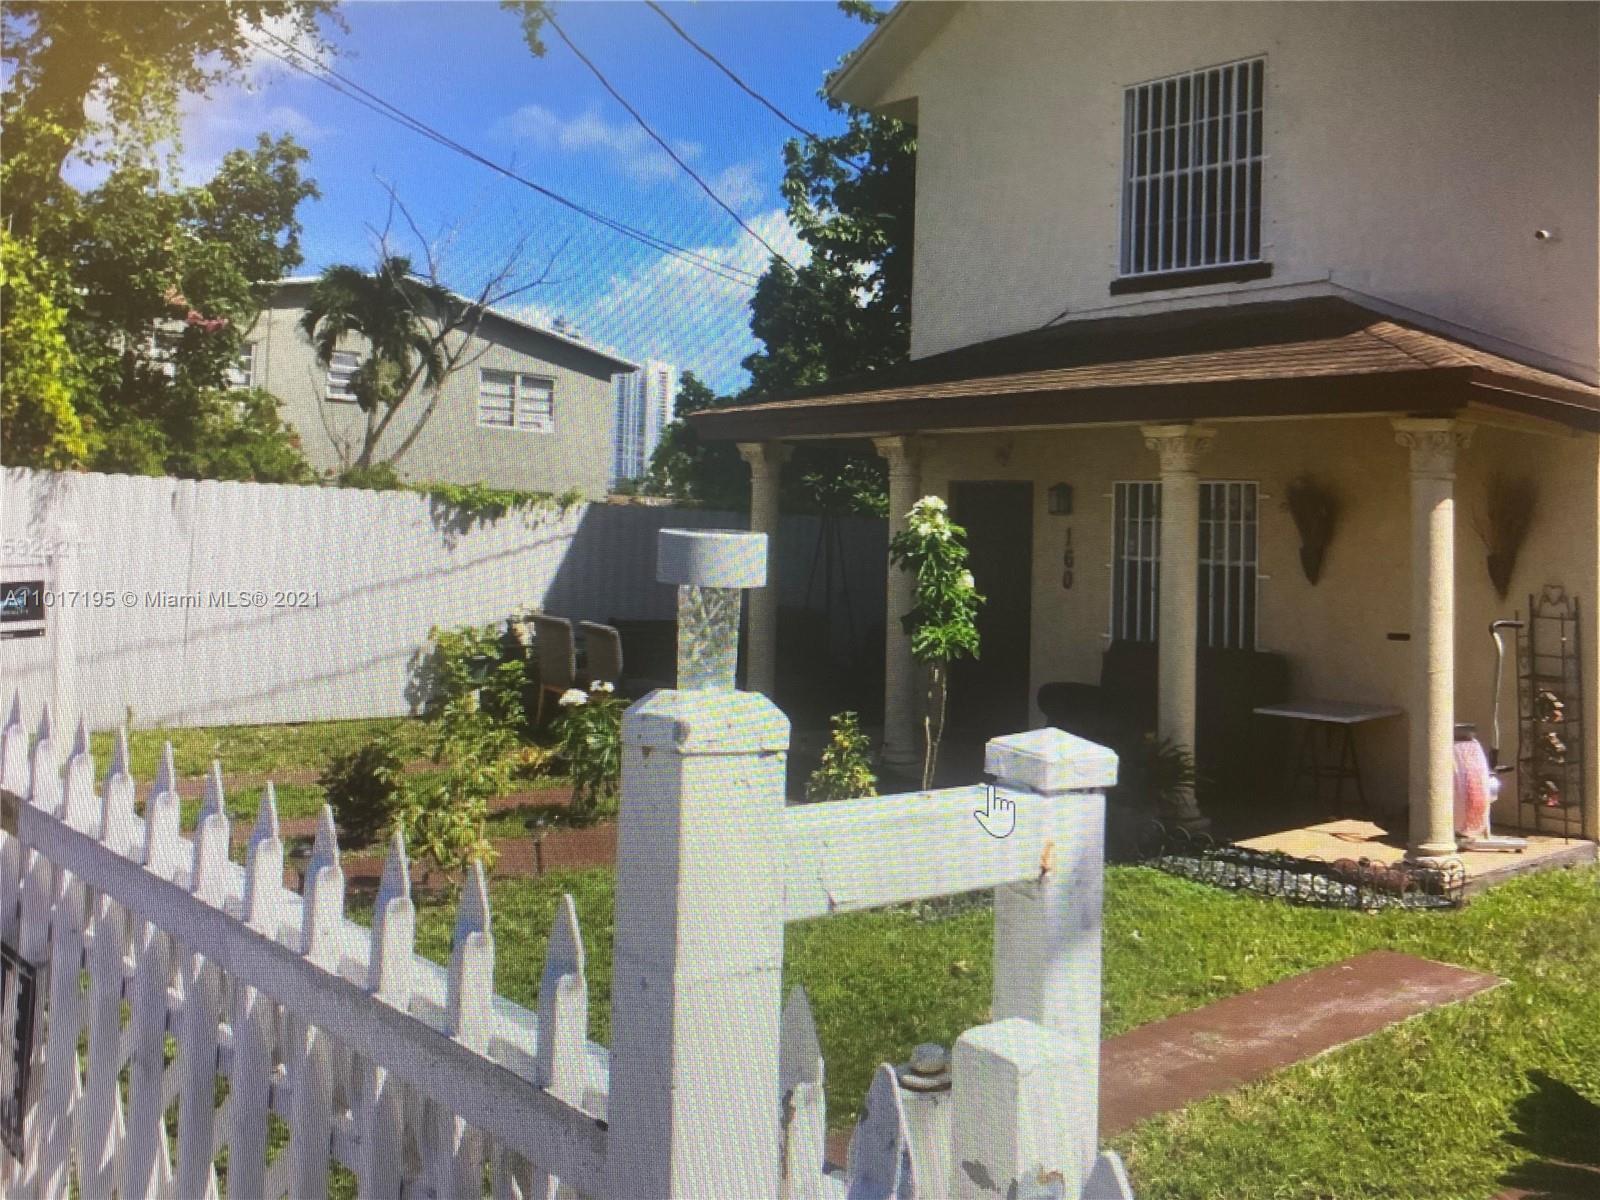 Photo of 160 NW 27th St in Miami, FL